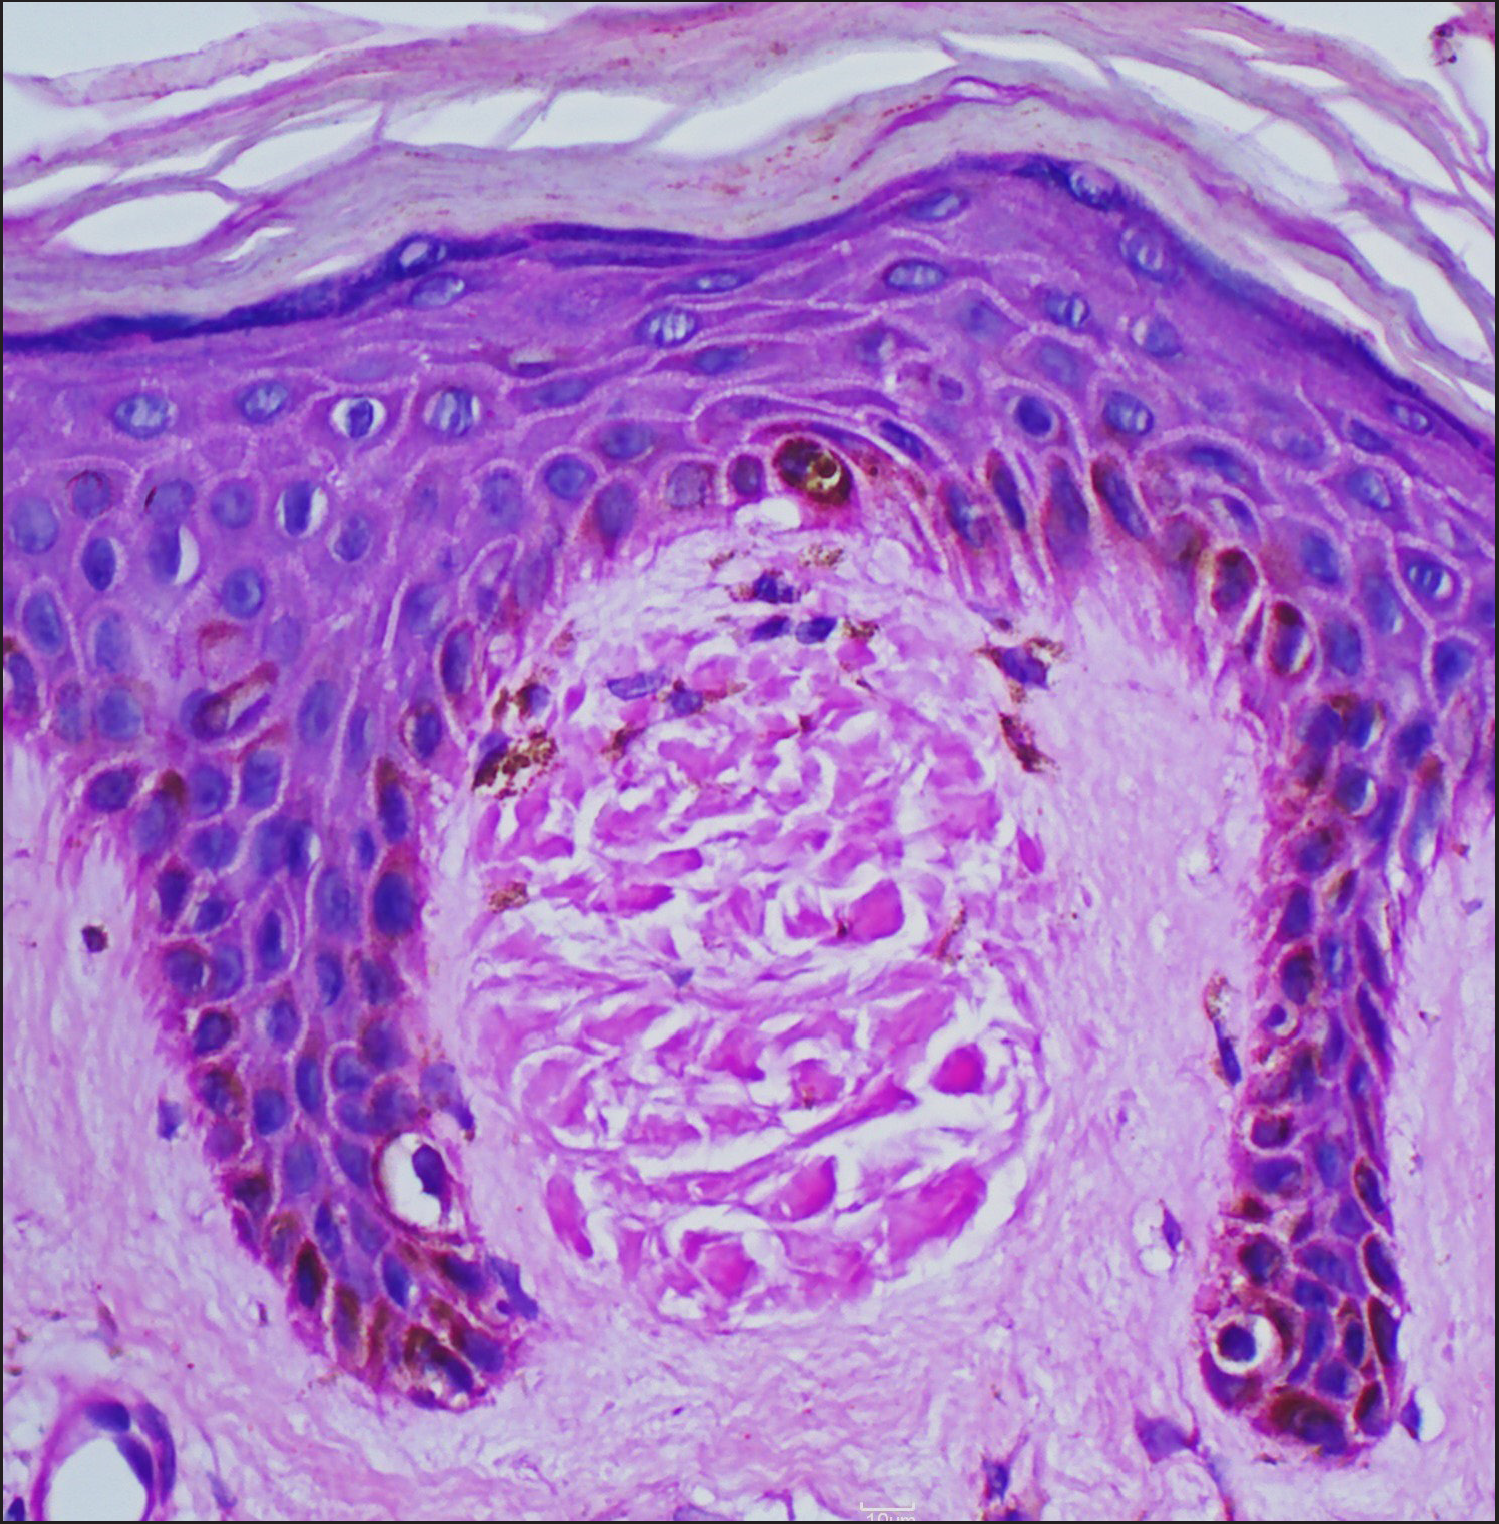 Primary cutaneous amyloidosis showing deposition of amorphous, eosinophilic material in widened papillary dermis (H and E, 400x)